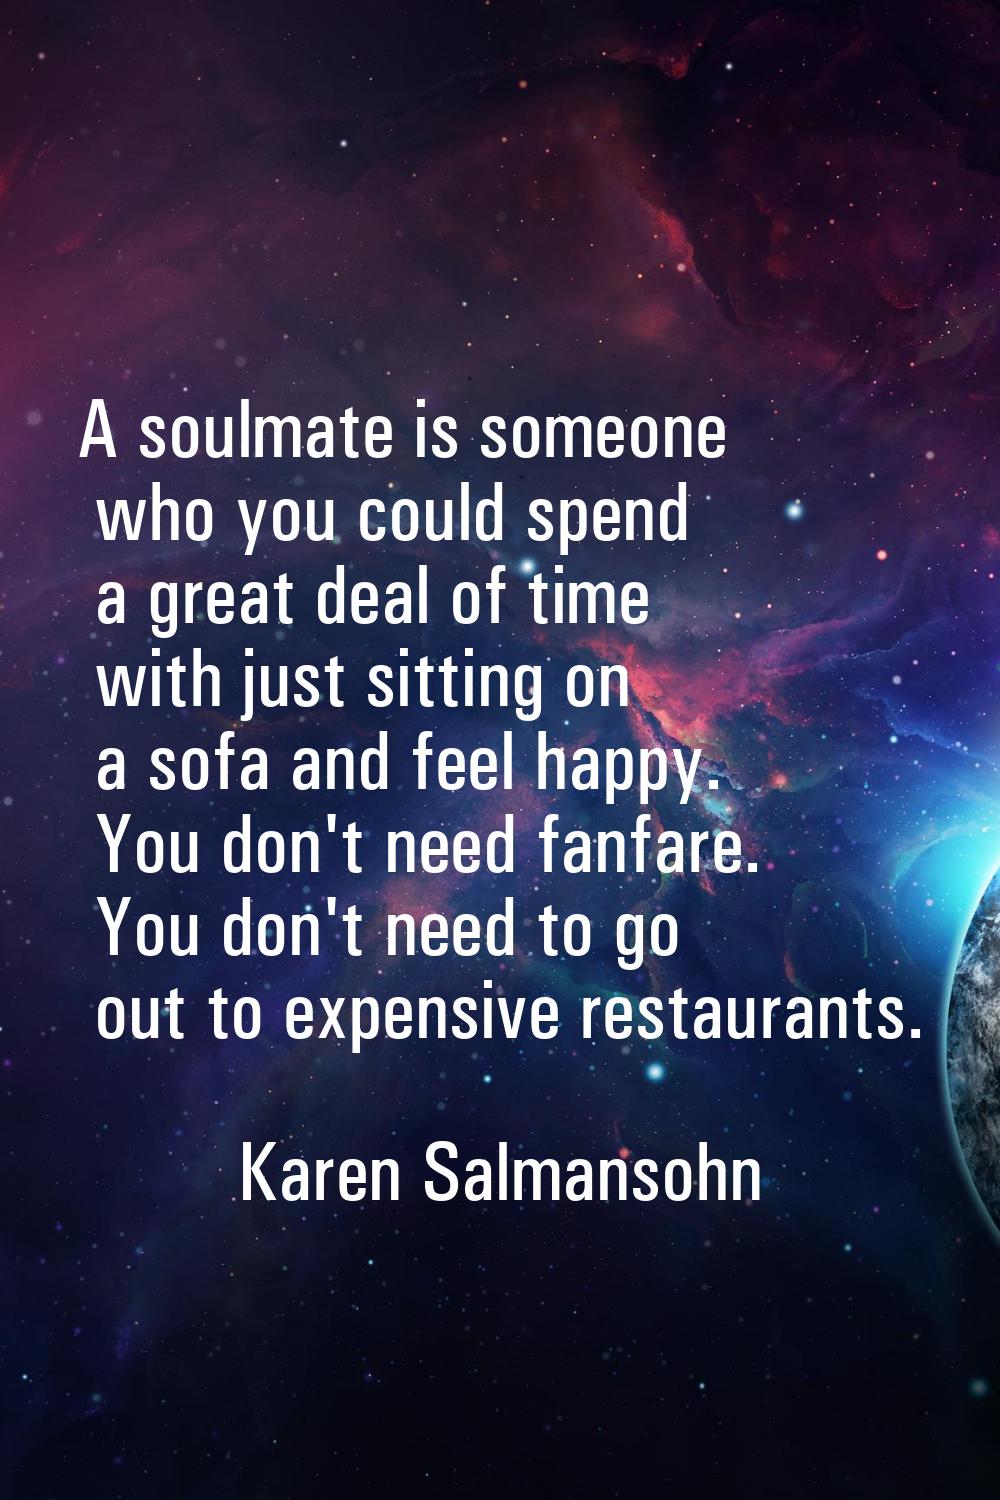 A soulmate is someone who you could spend a great deal of time with just sitting on a sofa and feel